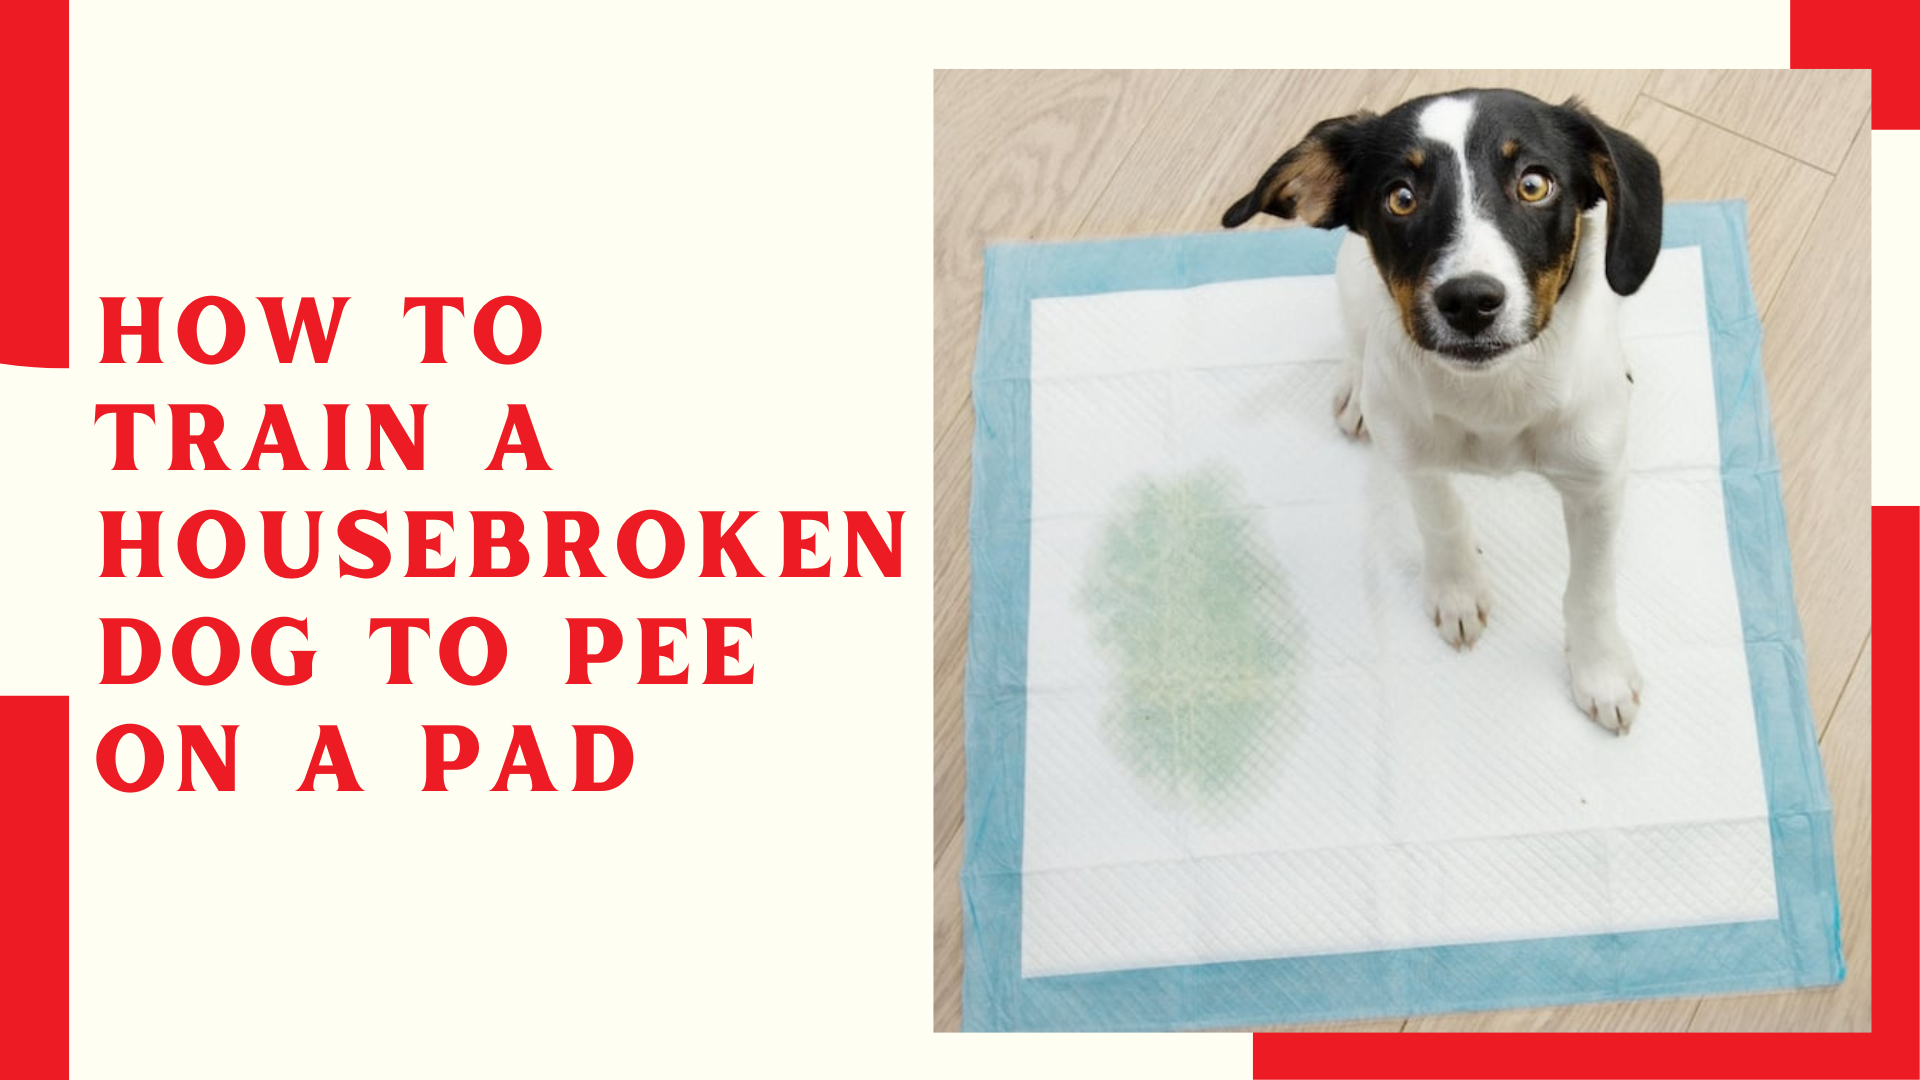 How To Train A Housebroken Dog To Pee On A Pad